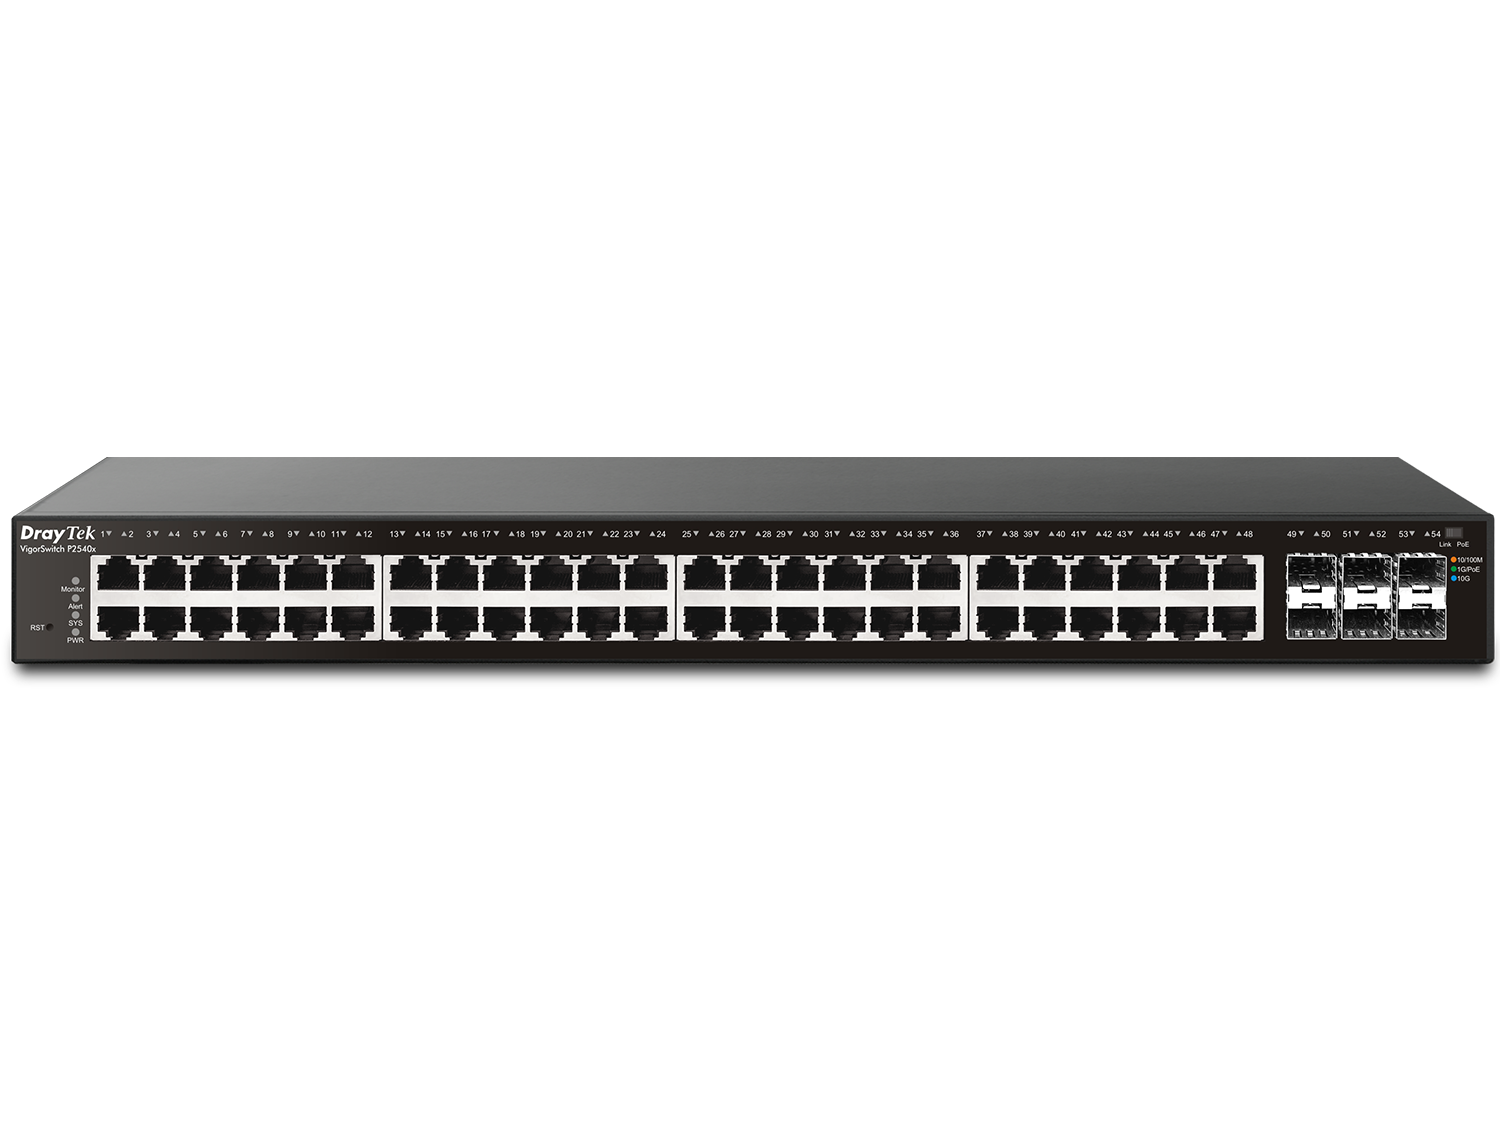  Managed POE Switch: 54 Ports - 48 ports GbE/PoE+ (400W) L2+ Managed Gigabit Switch with 6 x 10GbE SFP+ slots, and 1 x Console port  